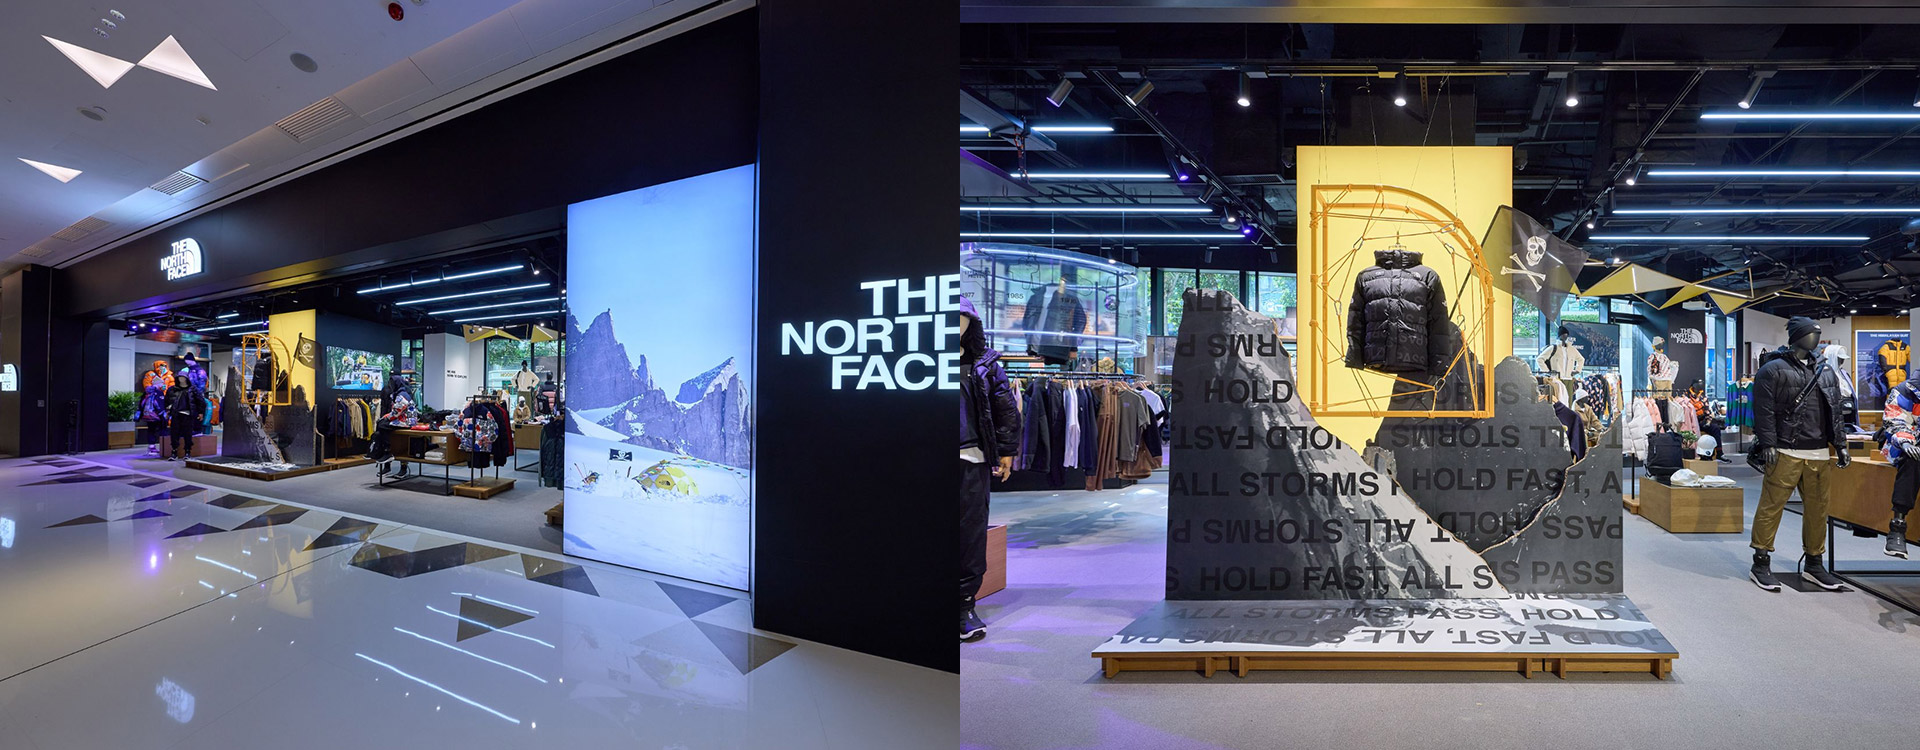 Omtrek Voorzieningen Arabische Sarabo The North Face Launches New Concept Store At K11 Art Mall - The North Face